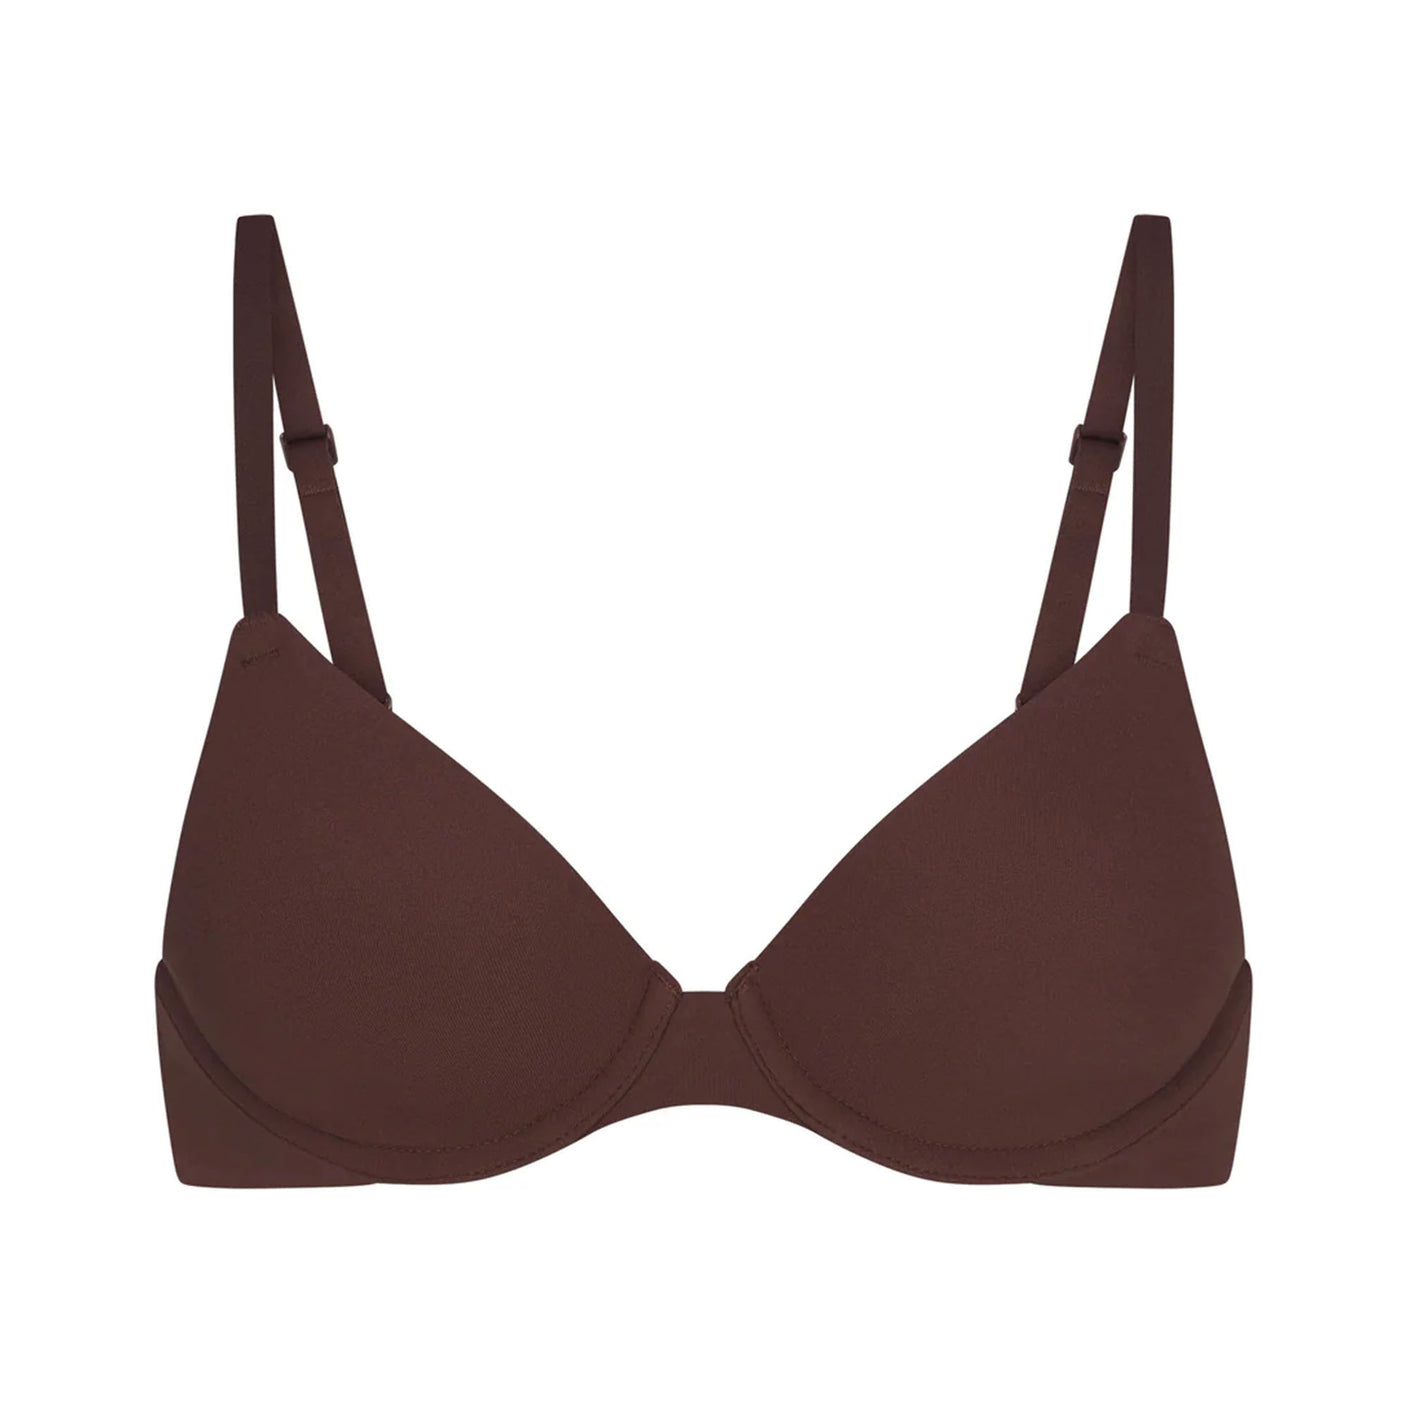 SKIMS - Designed with seamless, buttery soft fabric that molds to your  skin, the Fits Everybody Scoop Neck Bra was made for everyday wear. Shop  Fits Everybody underwear